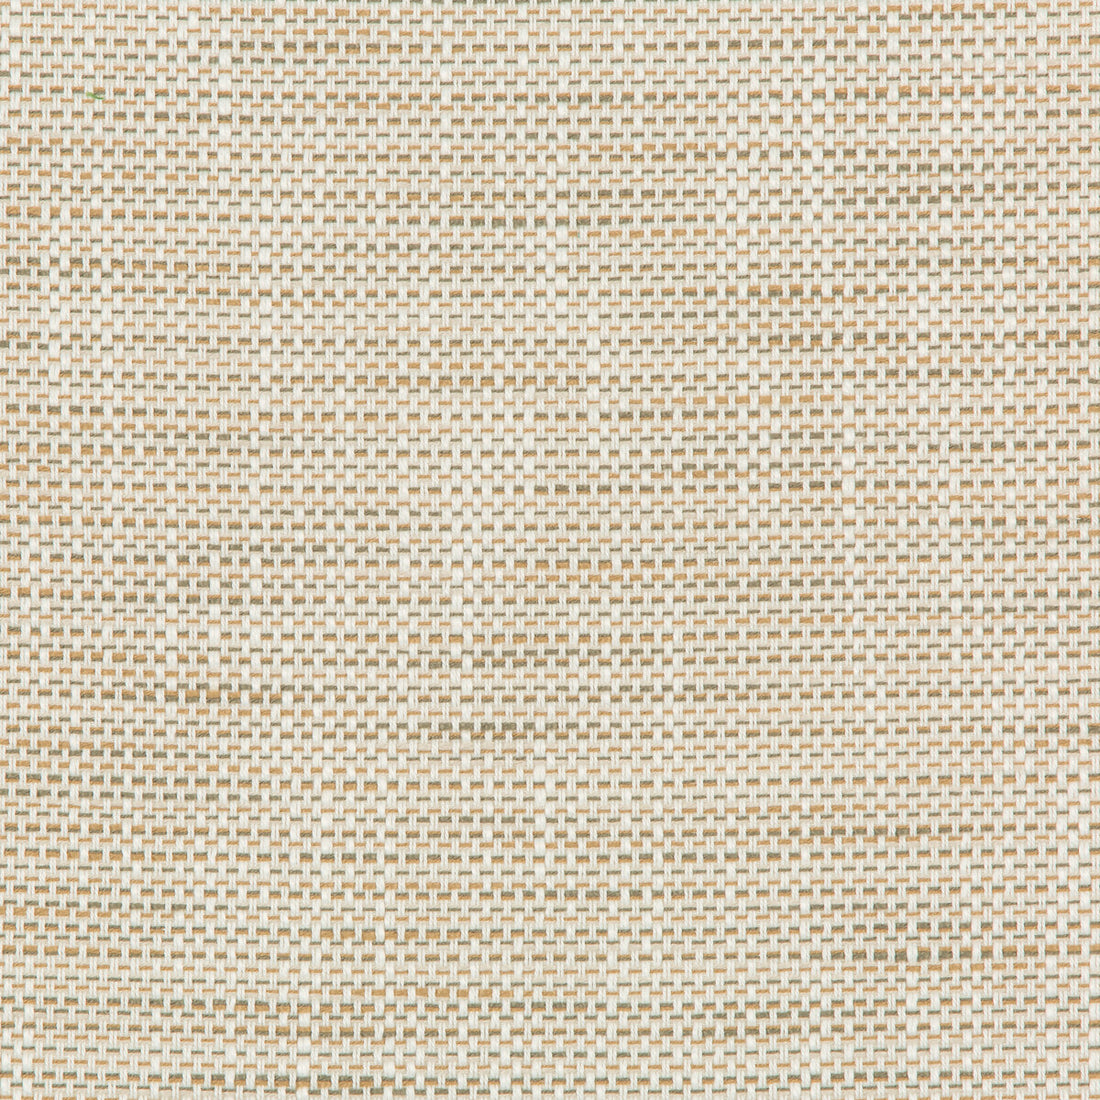 Kravet Design fabric in 36082-161 color - pattern 36082.161.0 - by Kravet Design in the Inside Out Performance Fabrics collection